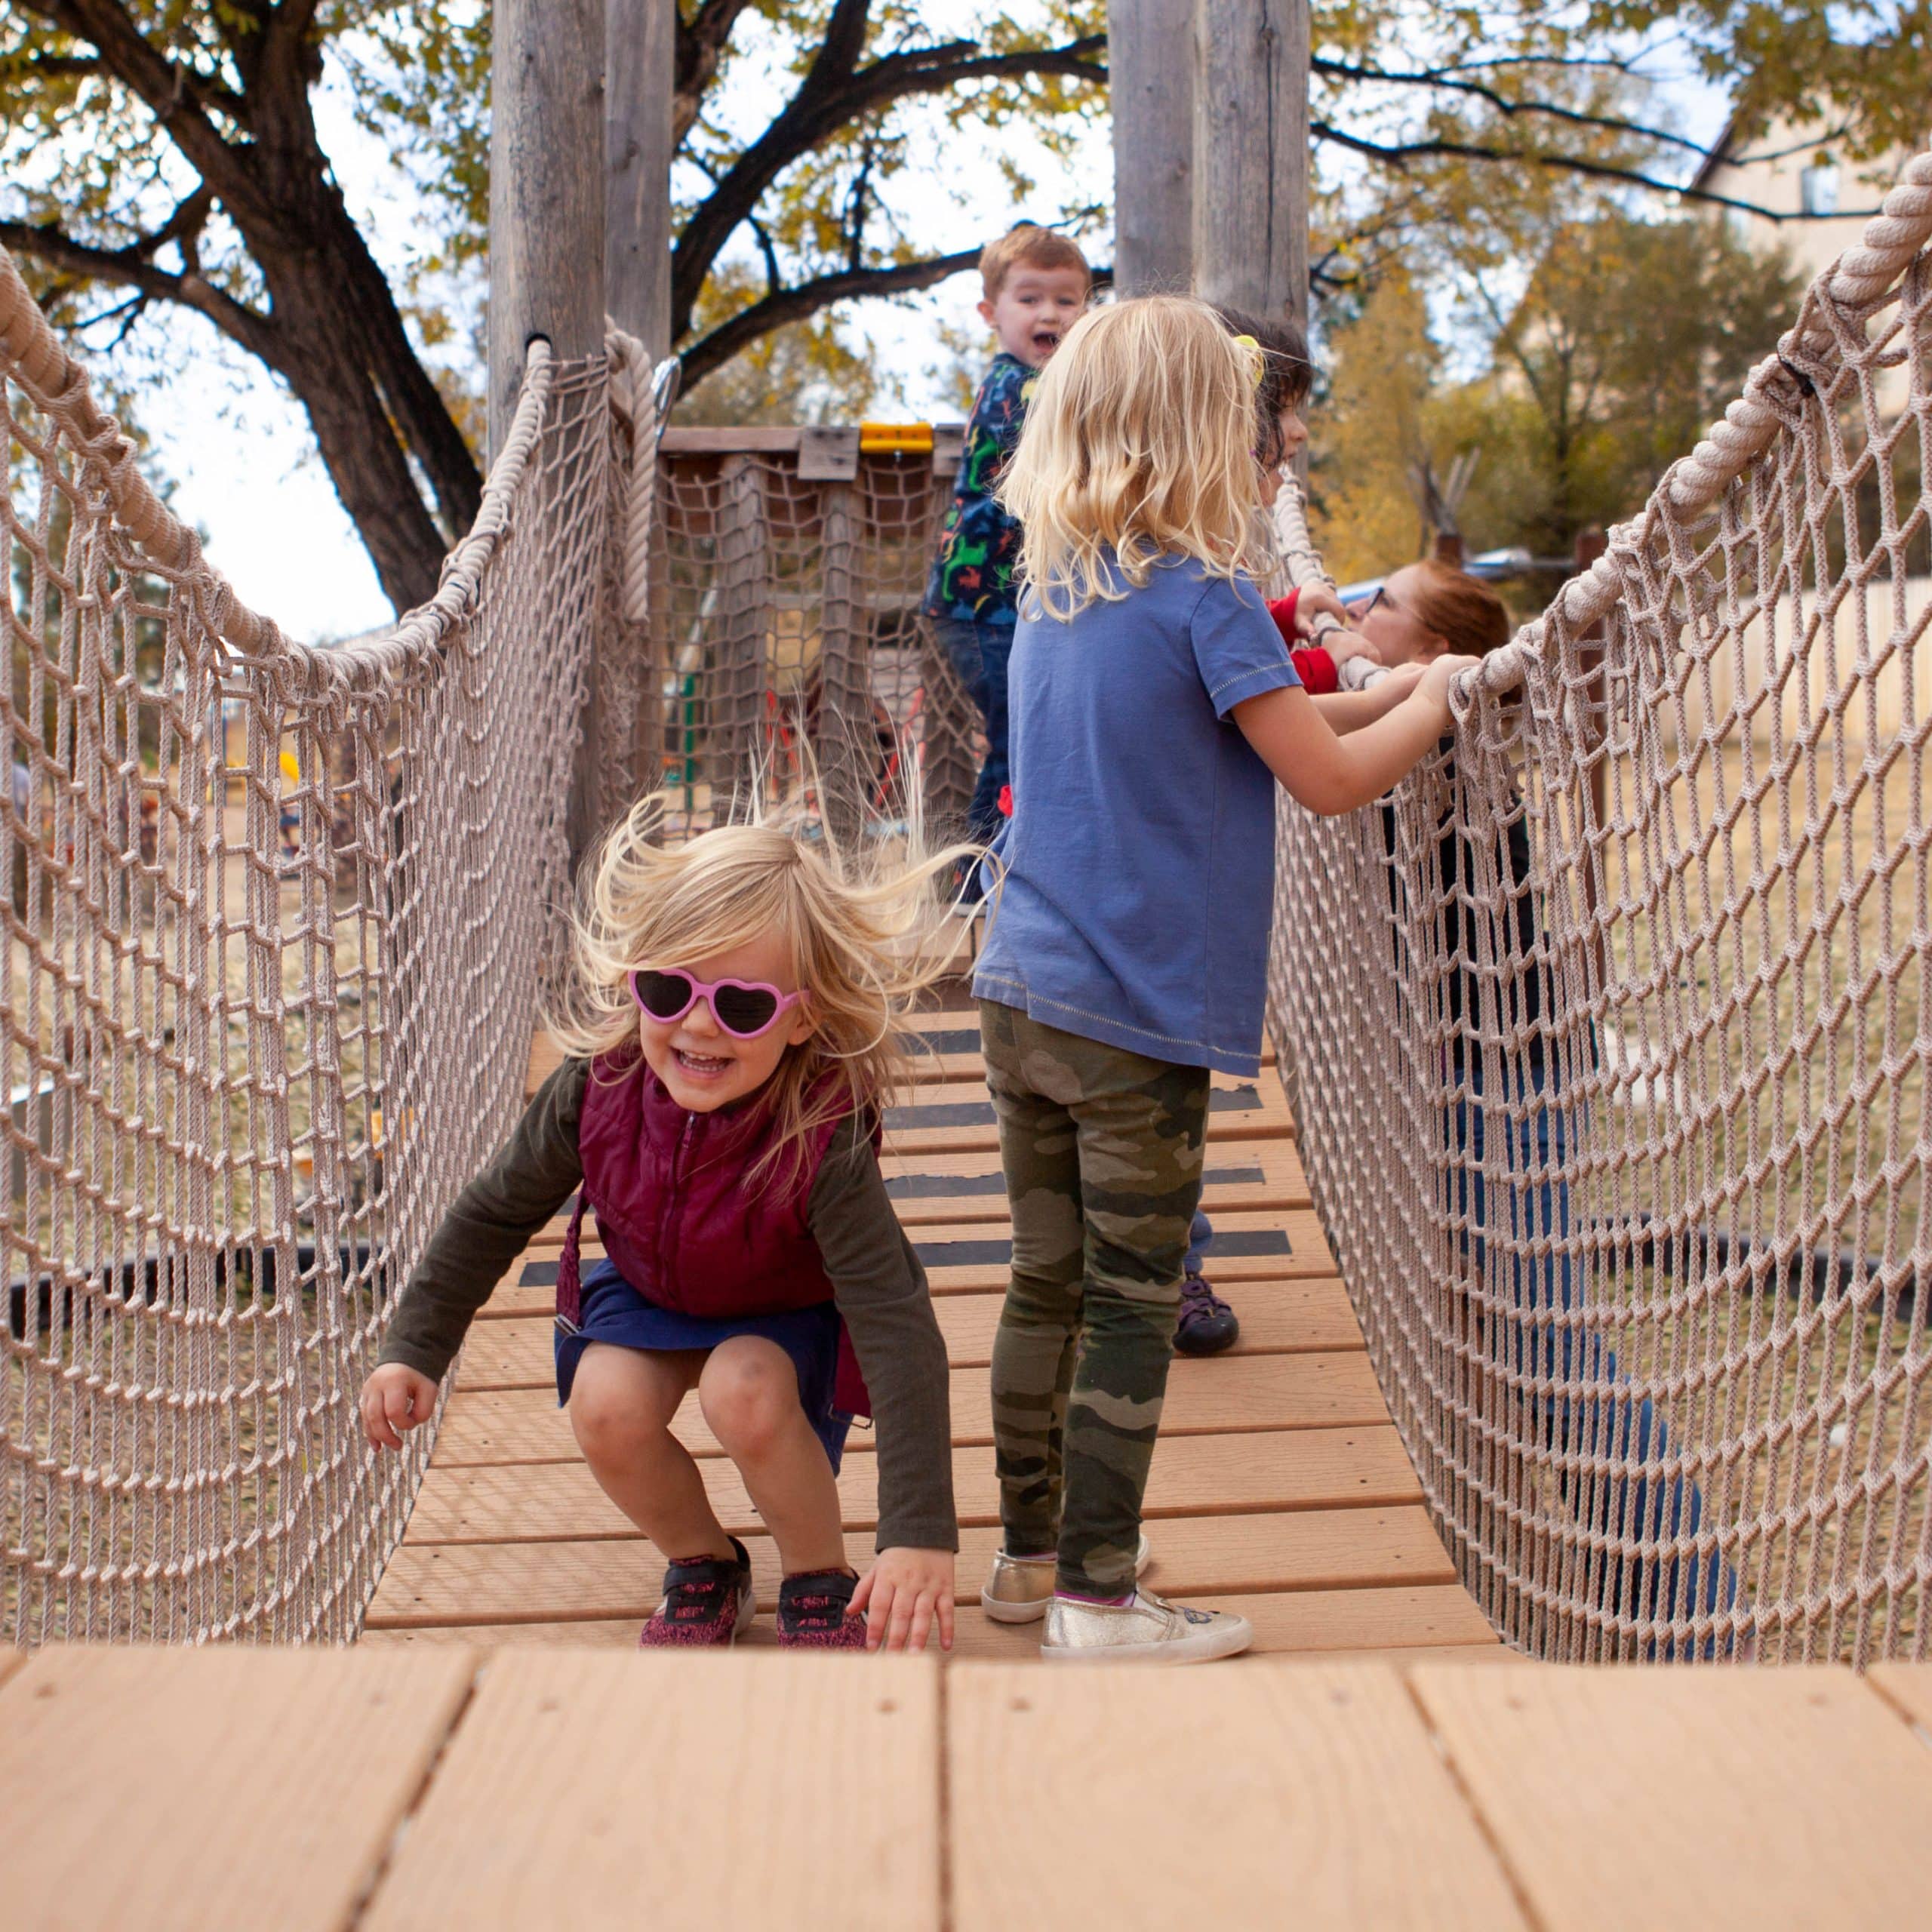 children walk across a wooden bridge with rope sides. One child with blond hair and sunglasses lands from a jump